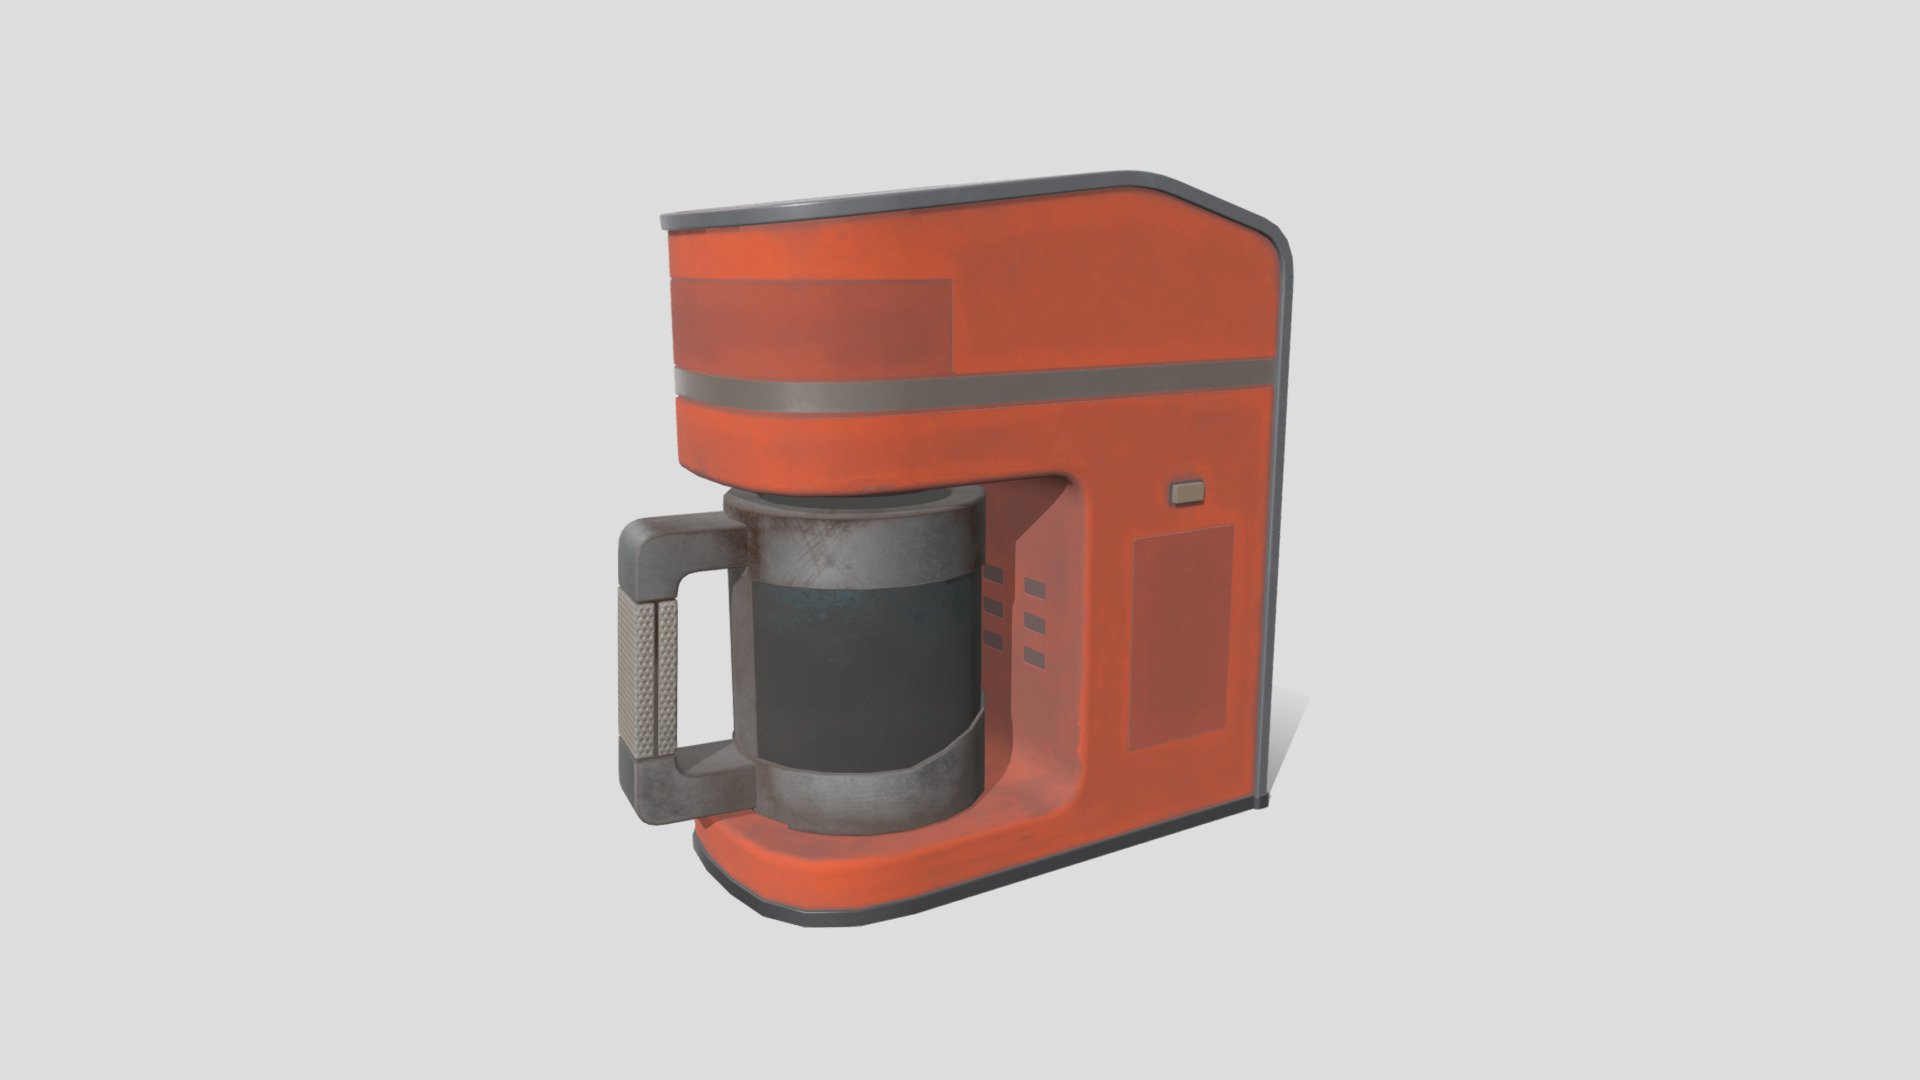 Simple Stylized Dusty Coffee Machine model made in 3ds Max 2022 and textured in Substance Painter

Model details:




Model pack contains .fbx / .max / .blend and .obj file formats

Textures aren’t embedded into each format and have to be plugged in manually

Nothing is rigged, nothing is animated

Fbx files are provided for 2014/2015, 2016/2017 and 2020 fbx versions

Model doesn’t have any overlapping UVs, there's no overlapping geometry

Model is split into 3 elements (button, coffee machine, coffee flask) which share a single UV map. Cup is centered to the middle of its bottom part, same goes for coffee machine, button is centered to its middle)

Textures come in a single 8bit 4k UV set

Texture pack contains .png textures of 4 color schemes optimized for Arnold, Vray, Corona, UnityHDmetal + .png/.jpeg and .targa files optimized for UE4

Make sure to contact me if you want more details or some minor adaptations to the model.

As usual: best wishes and have a nice day!:D - Stylized Dusty Retro Sci-fi Coffee Machine - 3D model by Art-Teeves 3d model